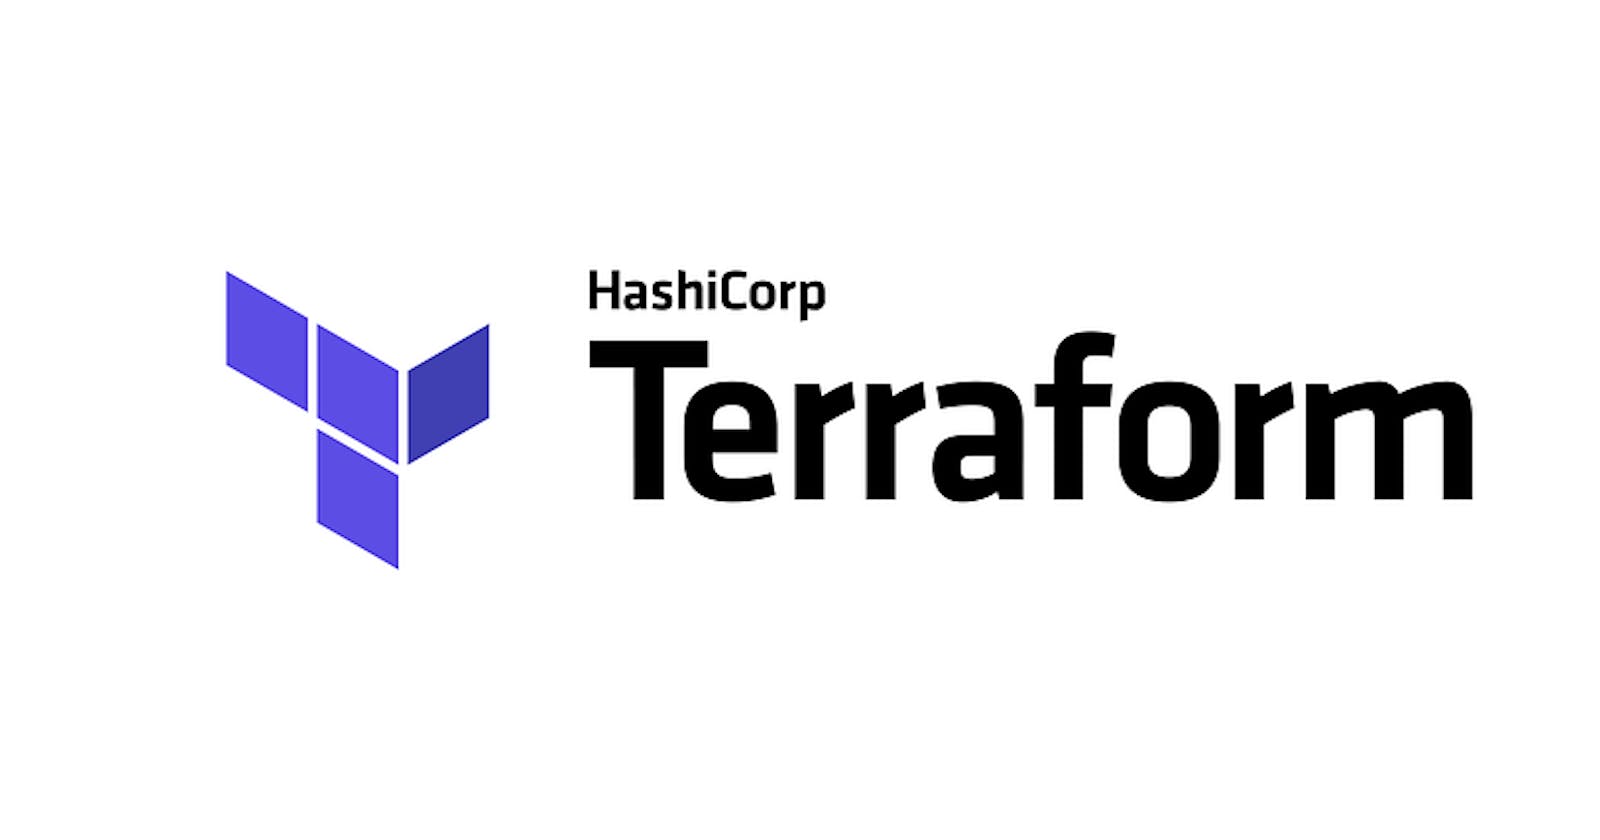 Terraform: introduction to primitives and complex data types